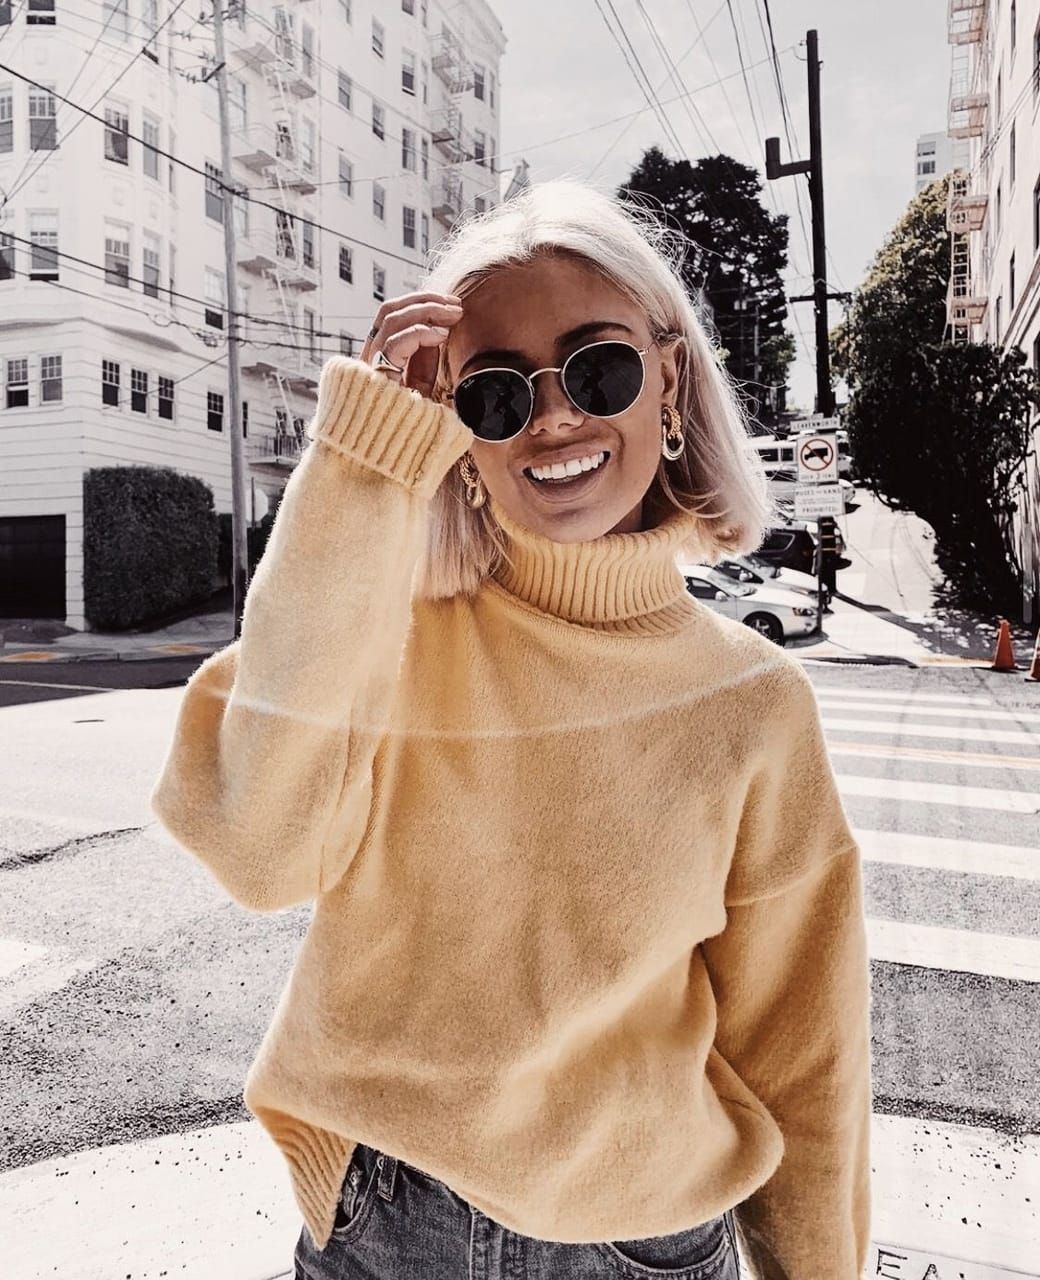 Blondewarrior February 01 2020 At 07:21PM Fashion Inspo. Fashion. Clothes. Shoes. Luxury. For Women. Casual Style. Dresses. Ou. Fashion, Clothes, Outfits